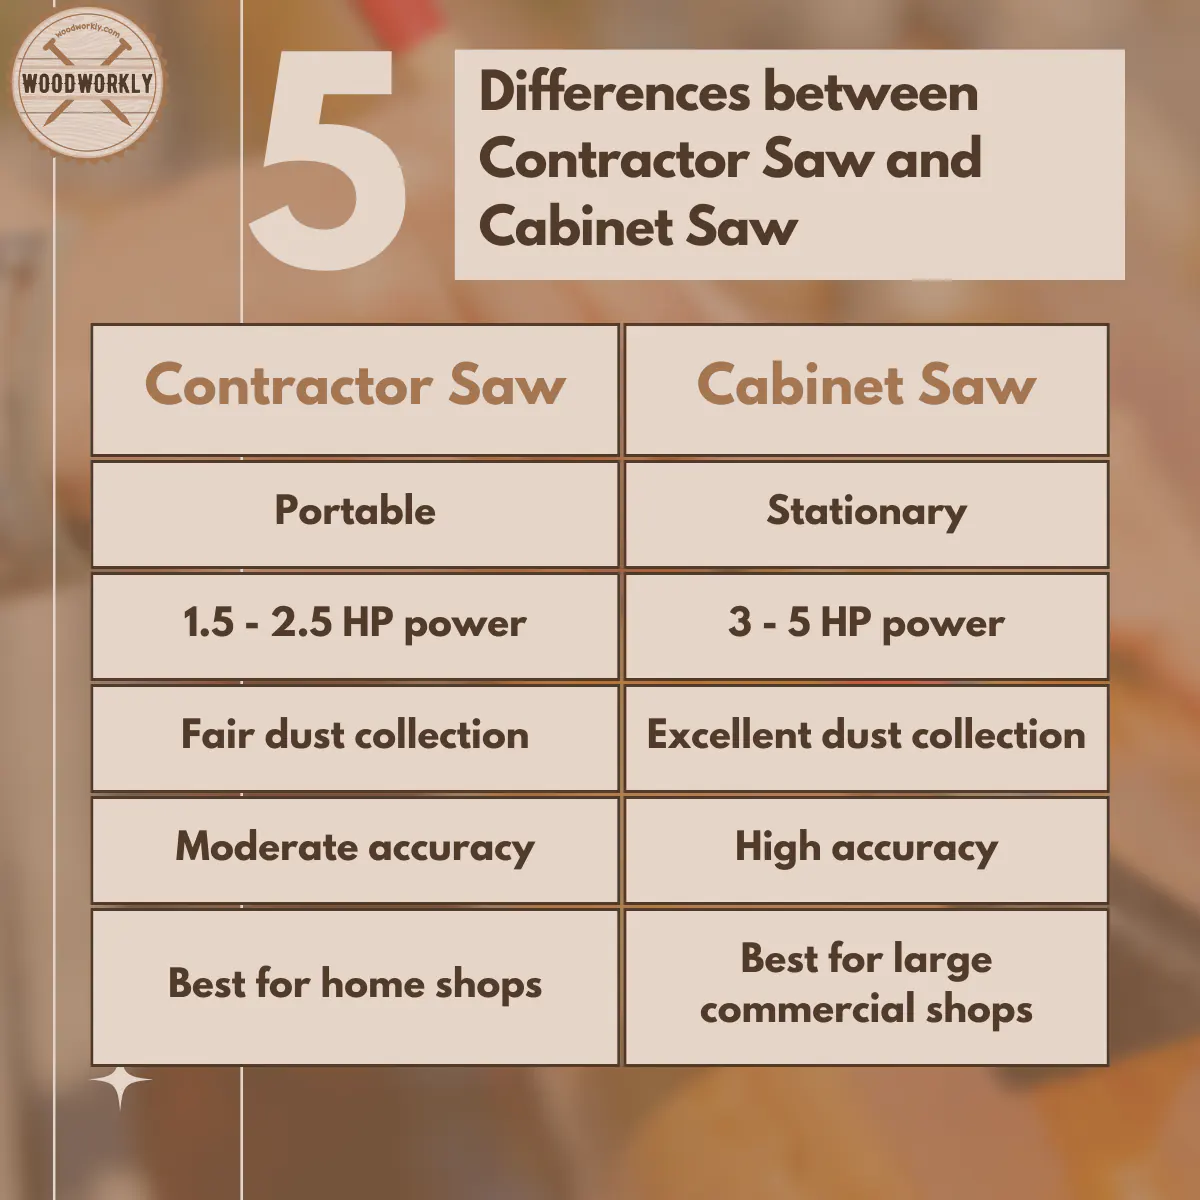 Differences between Contractor Saw and Cabinet Saw